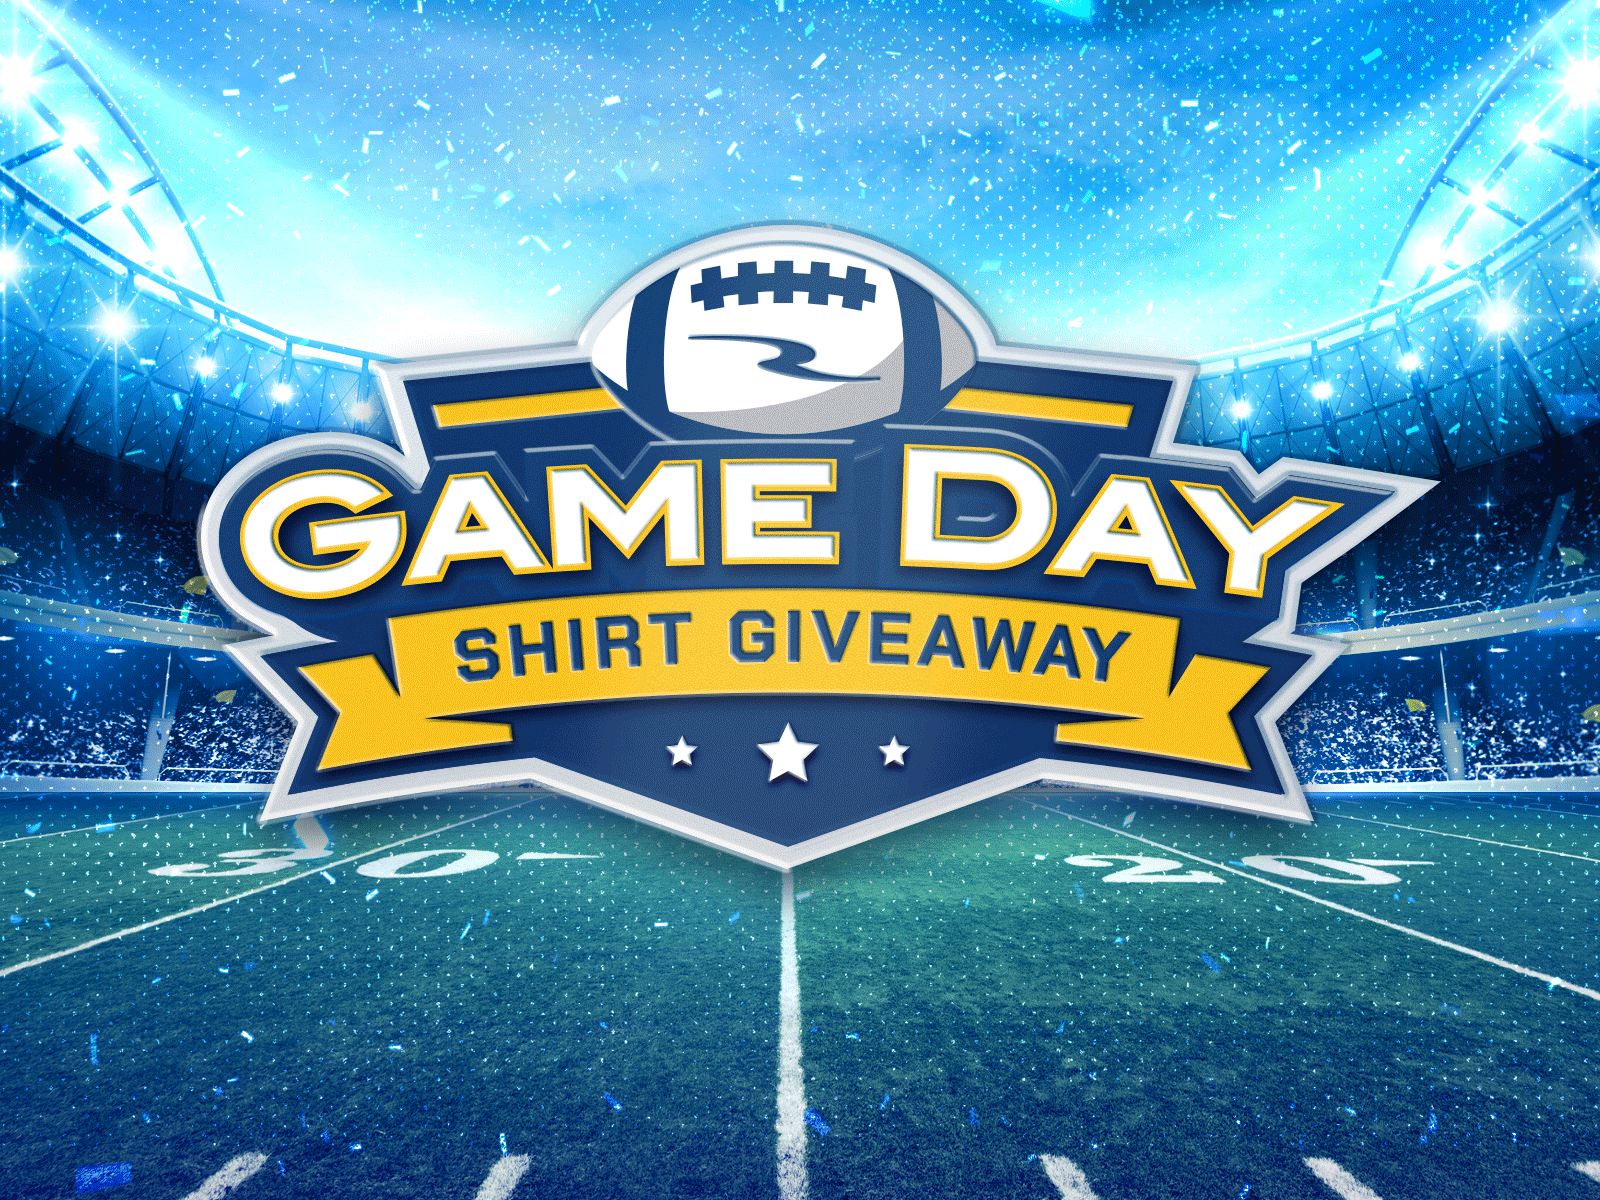 Rivers Game Day Shirt Giveaway Promo casino flyer football game day gaming giveaway new york poster print promo promotion resort rivers schenectady sport badge sports sports logo super bowl